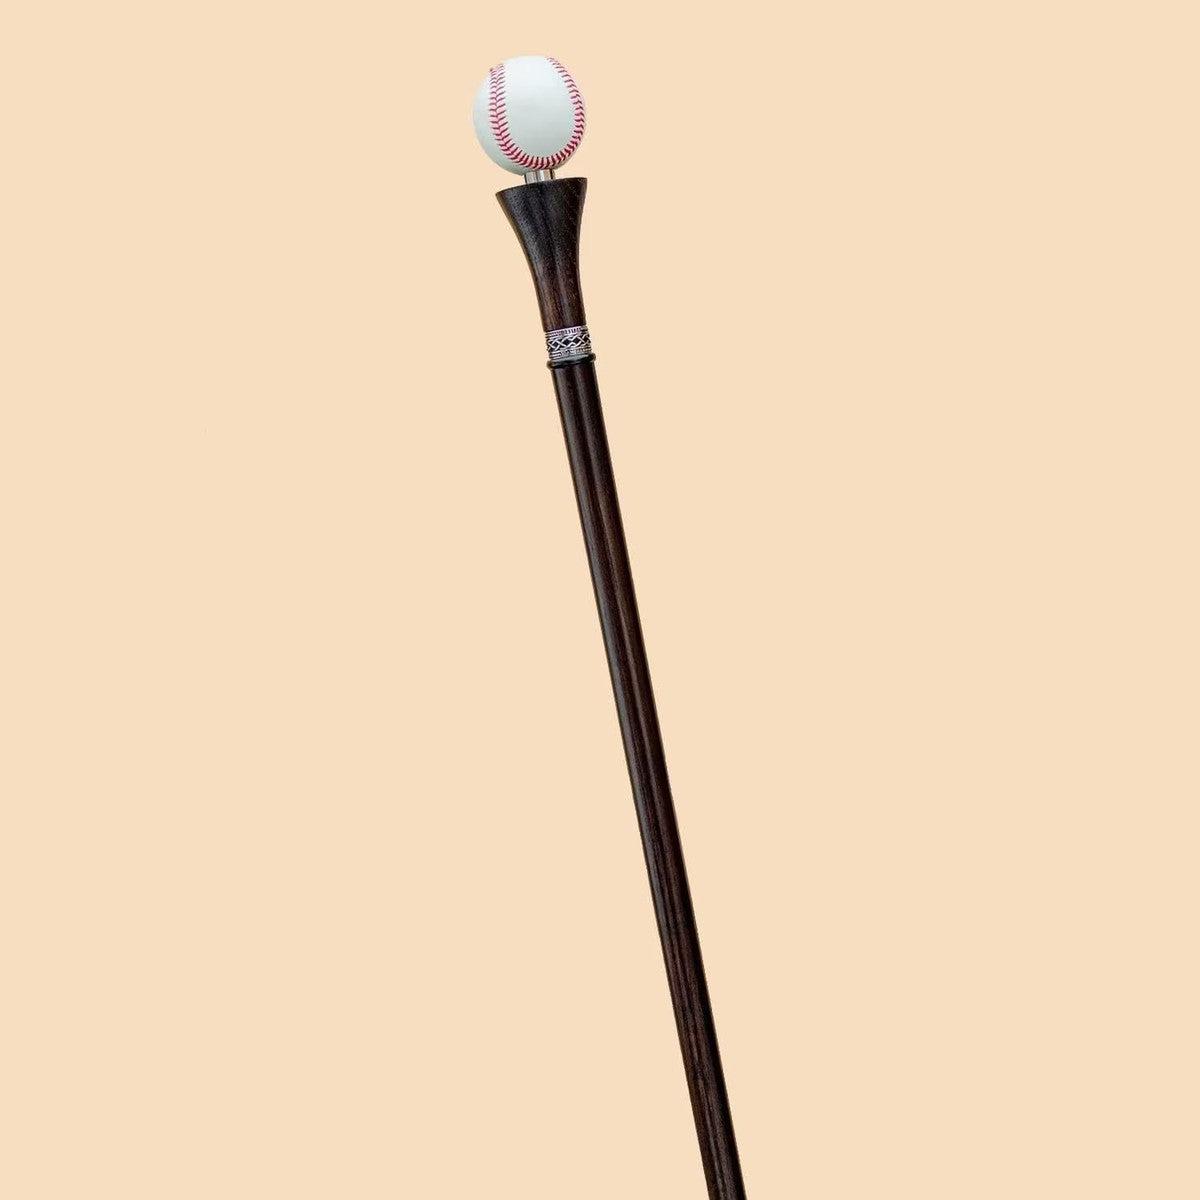 "Handcrafted Wooden Walking Cane for Men with Custom Baseball Knob - Elegant and Unique Carved Wood Walking Stick"